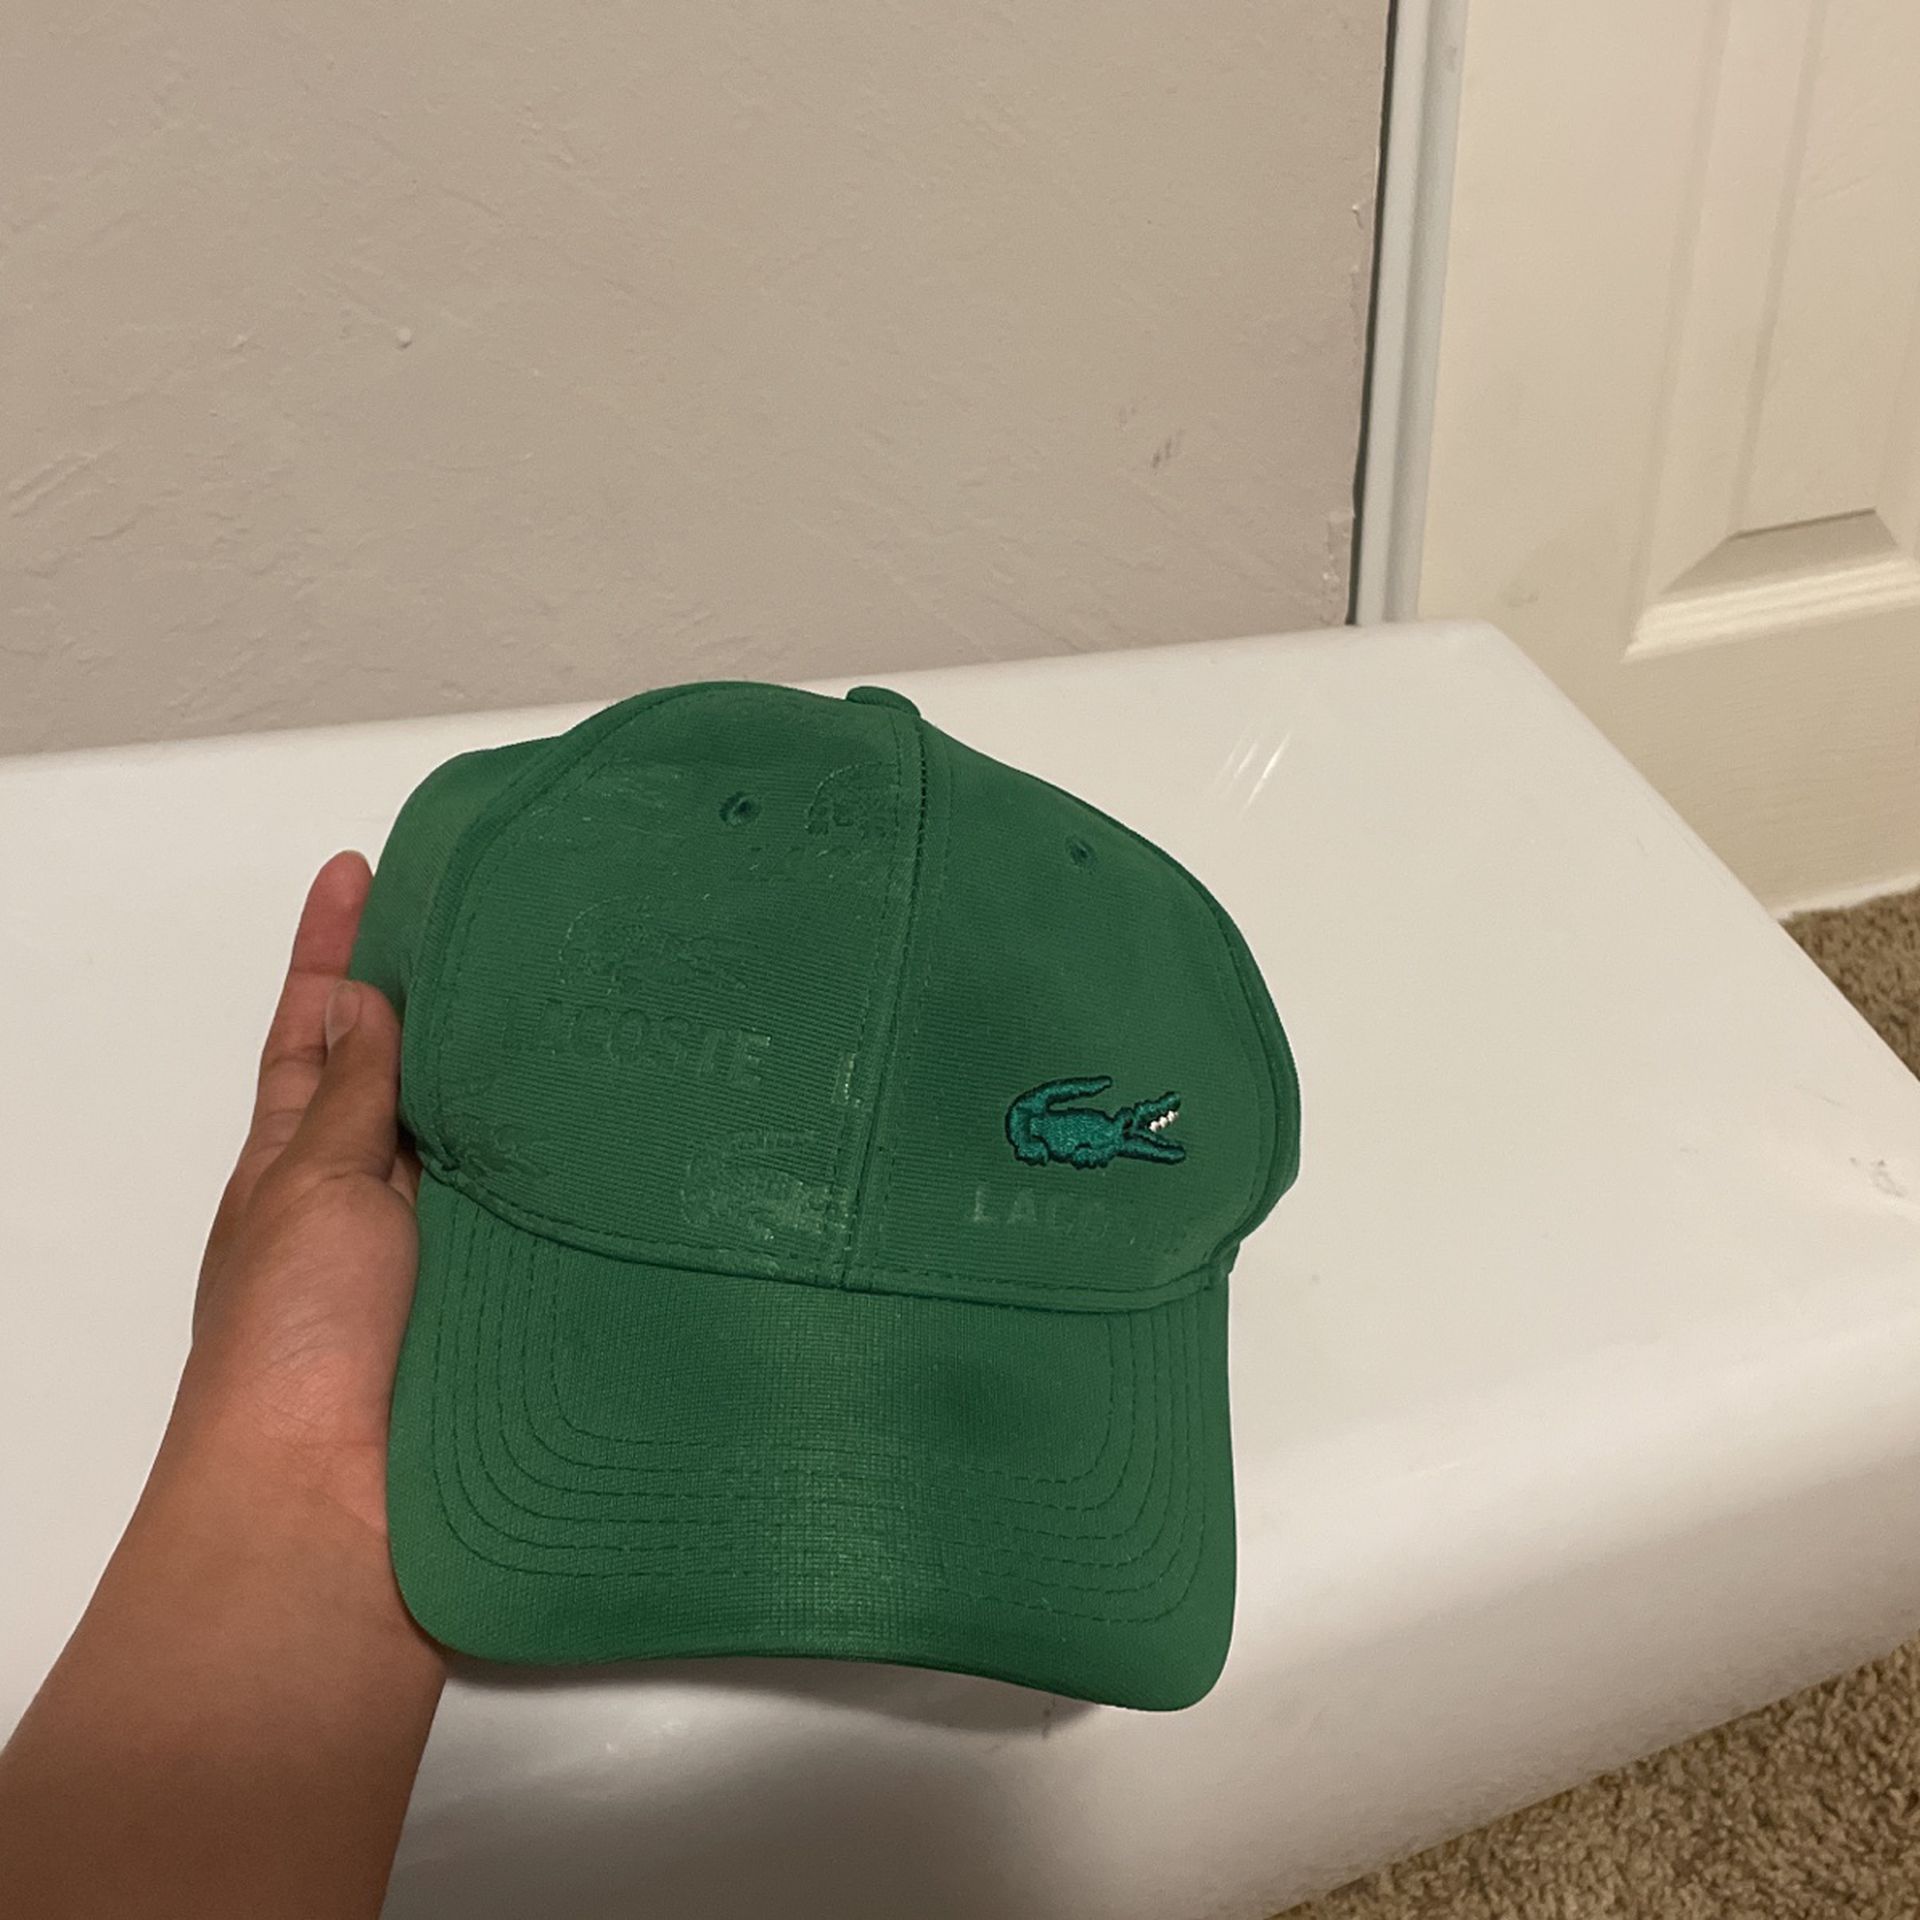 Lacoste Hat for San Leandro, CA - OfferUp